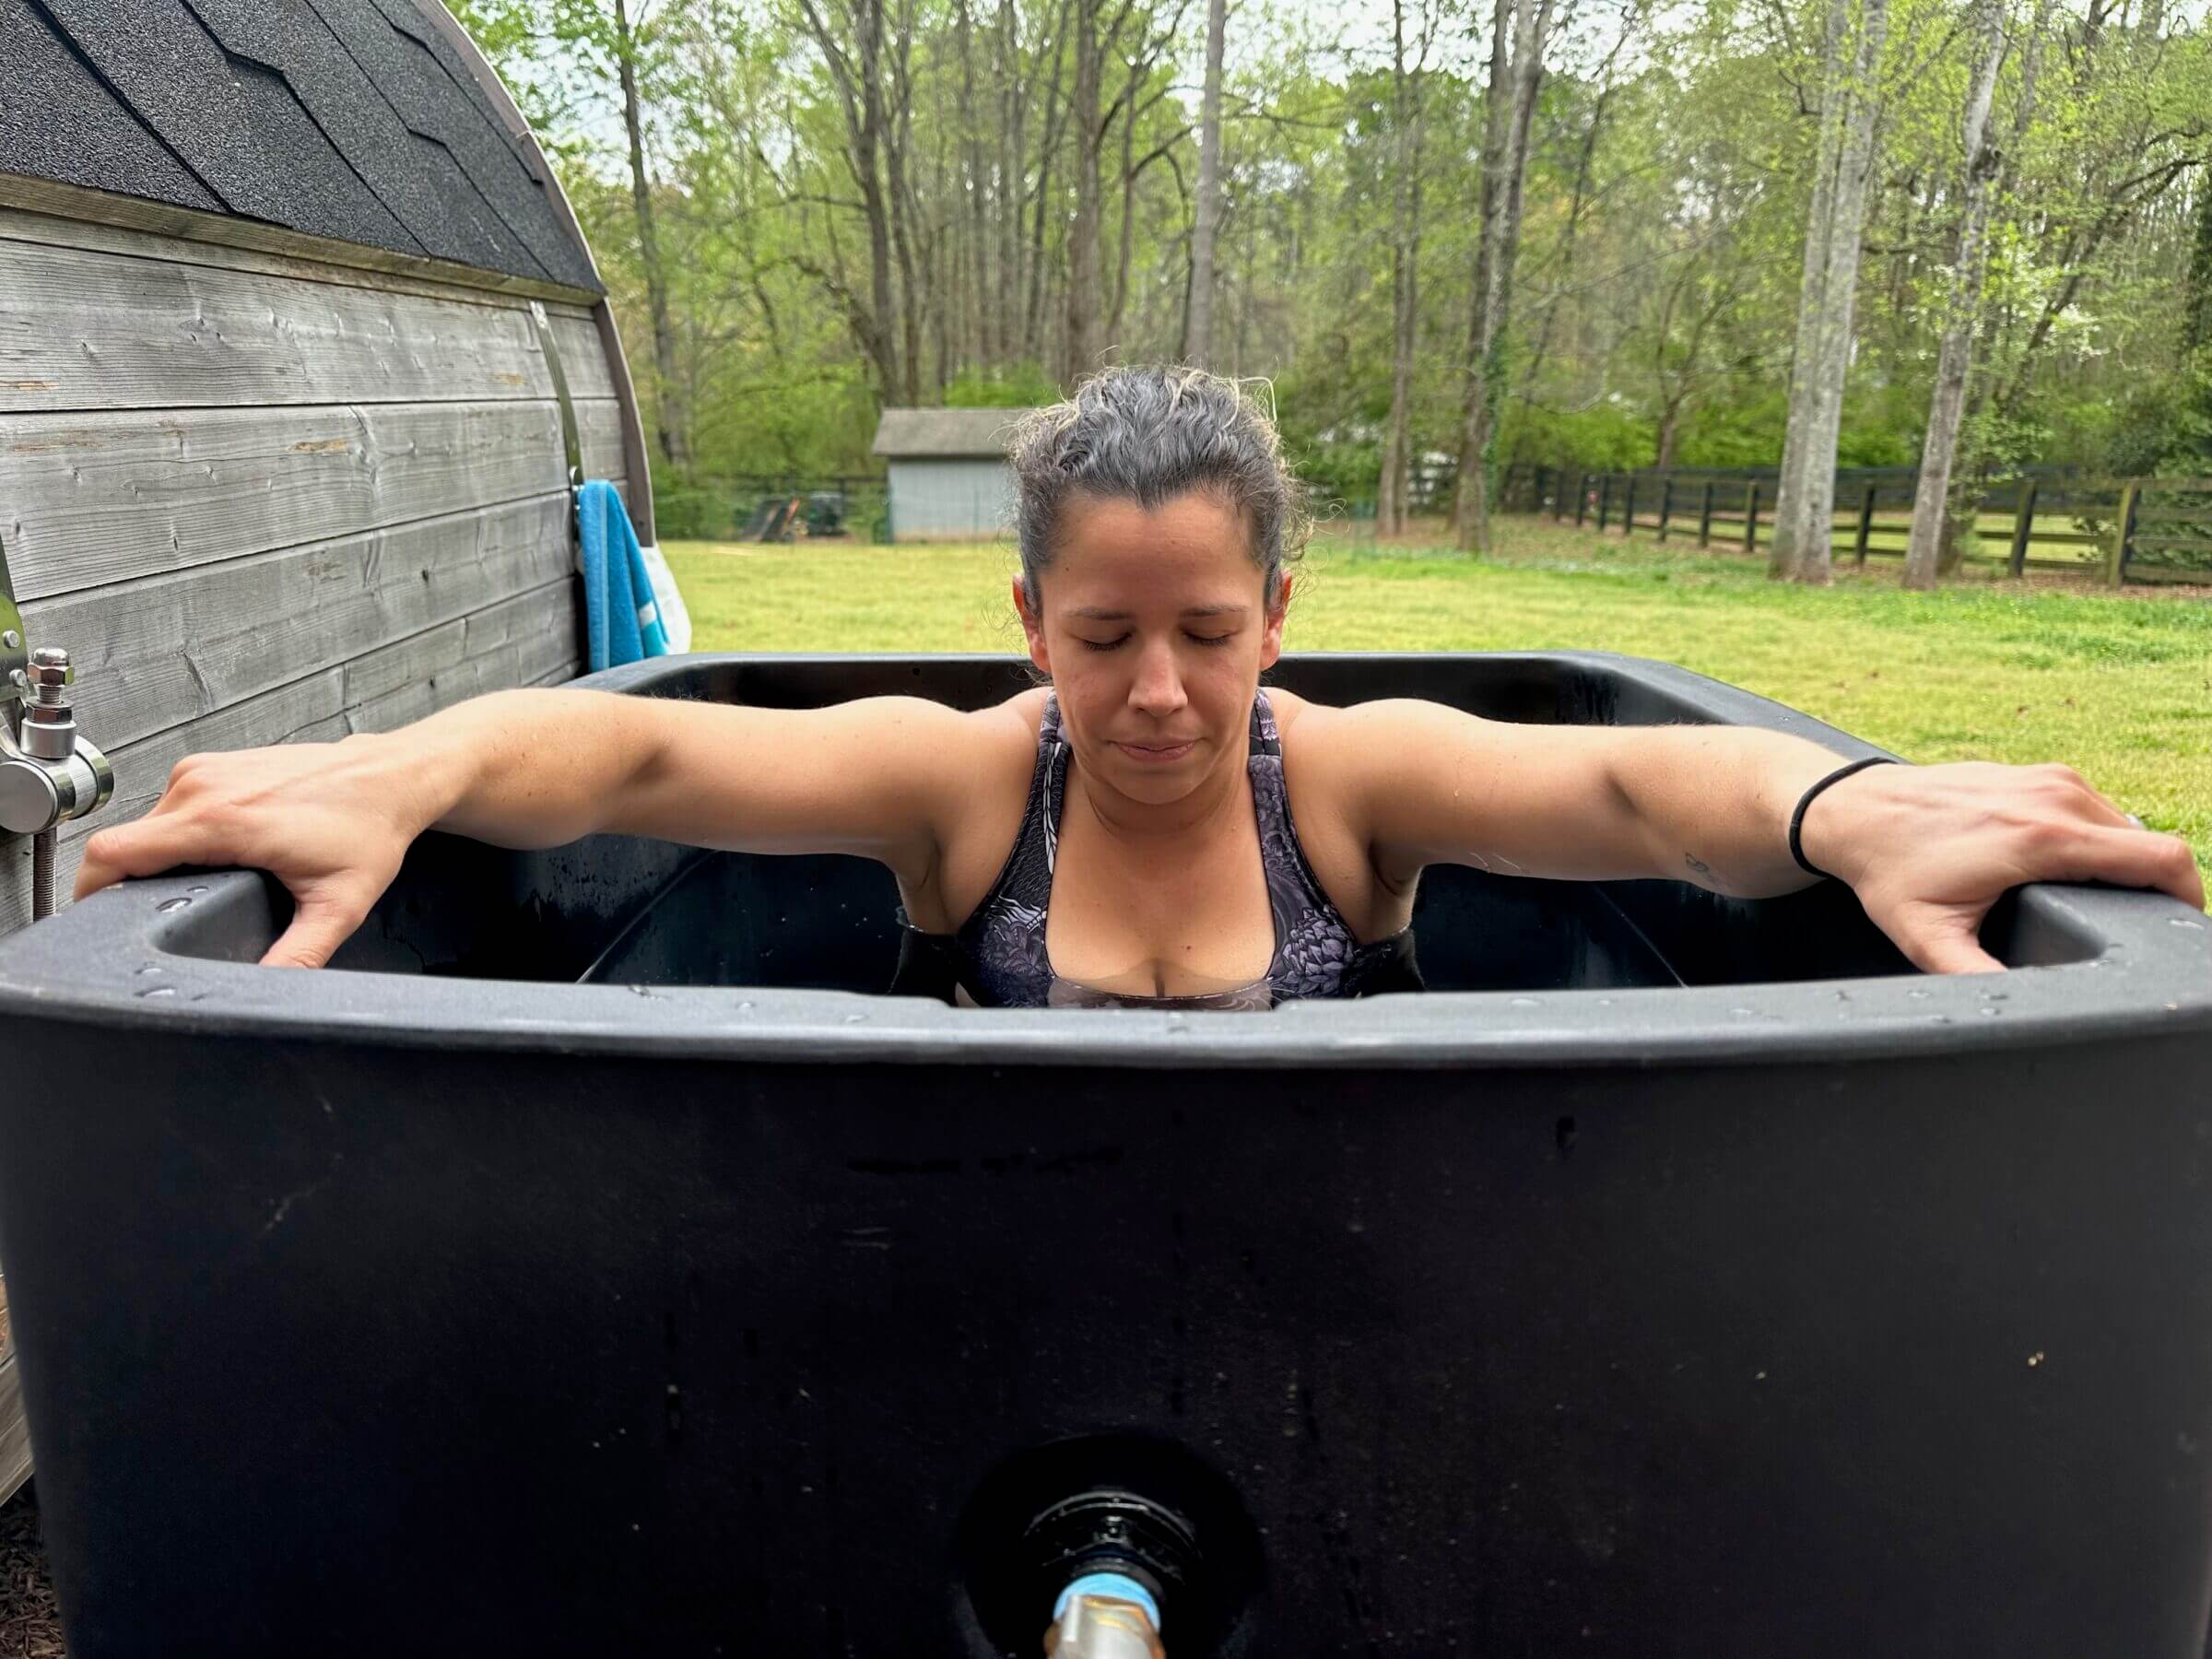 My wife started cold plunging regularly when we got the Ice Barrel 500.